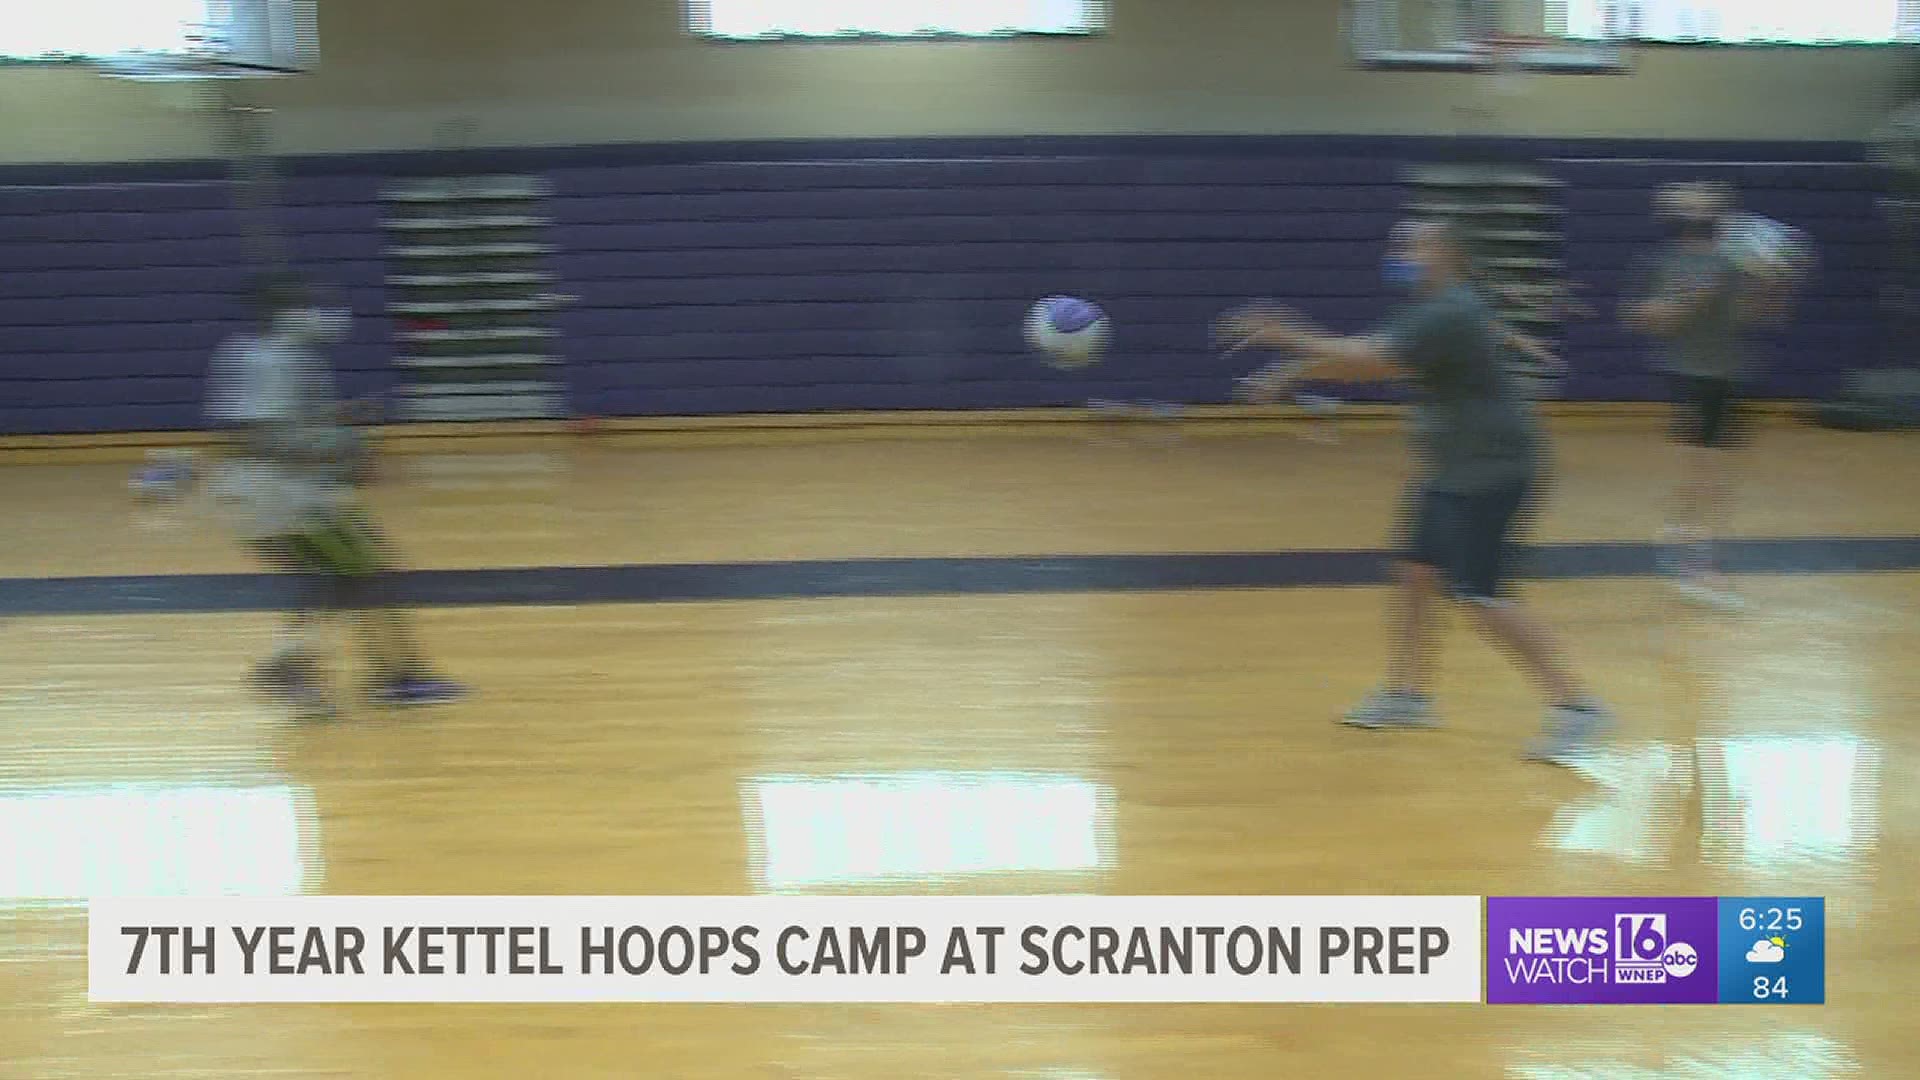 Andrew Kettel basketball camp at Scranton Prep wraps up a week that assists weaknesses